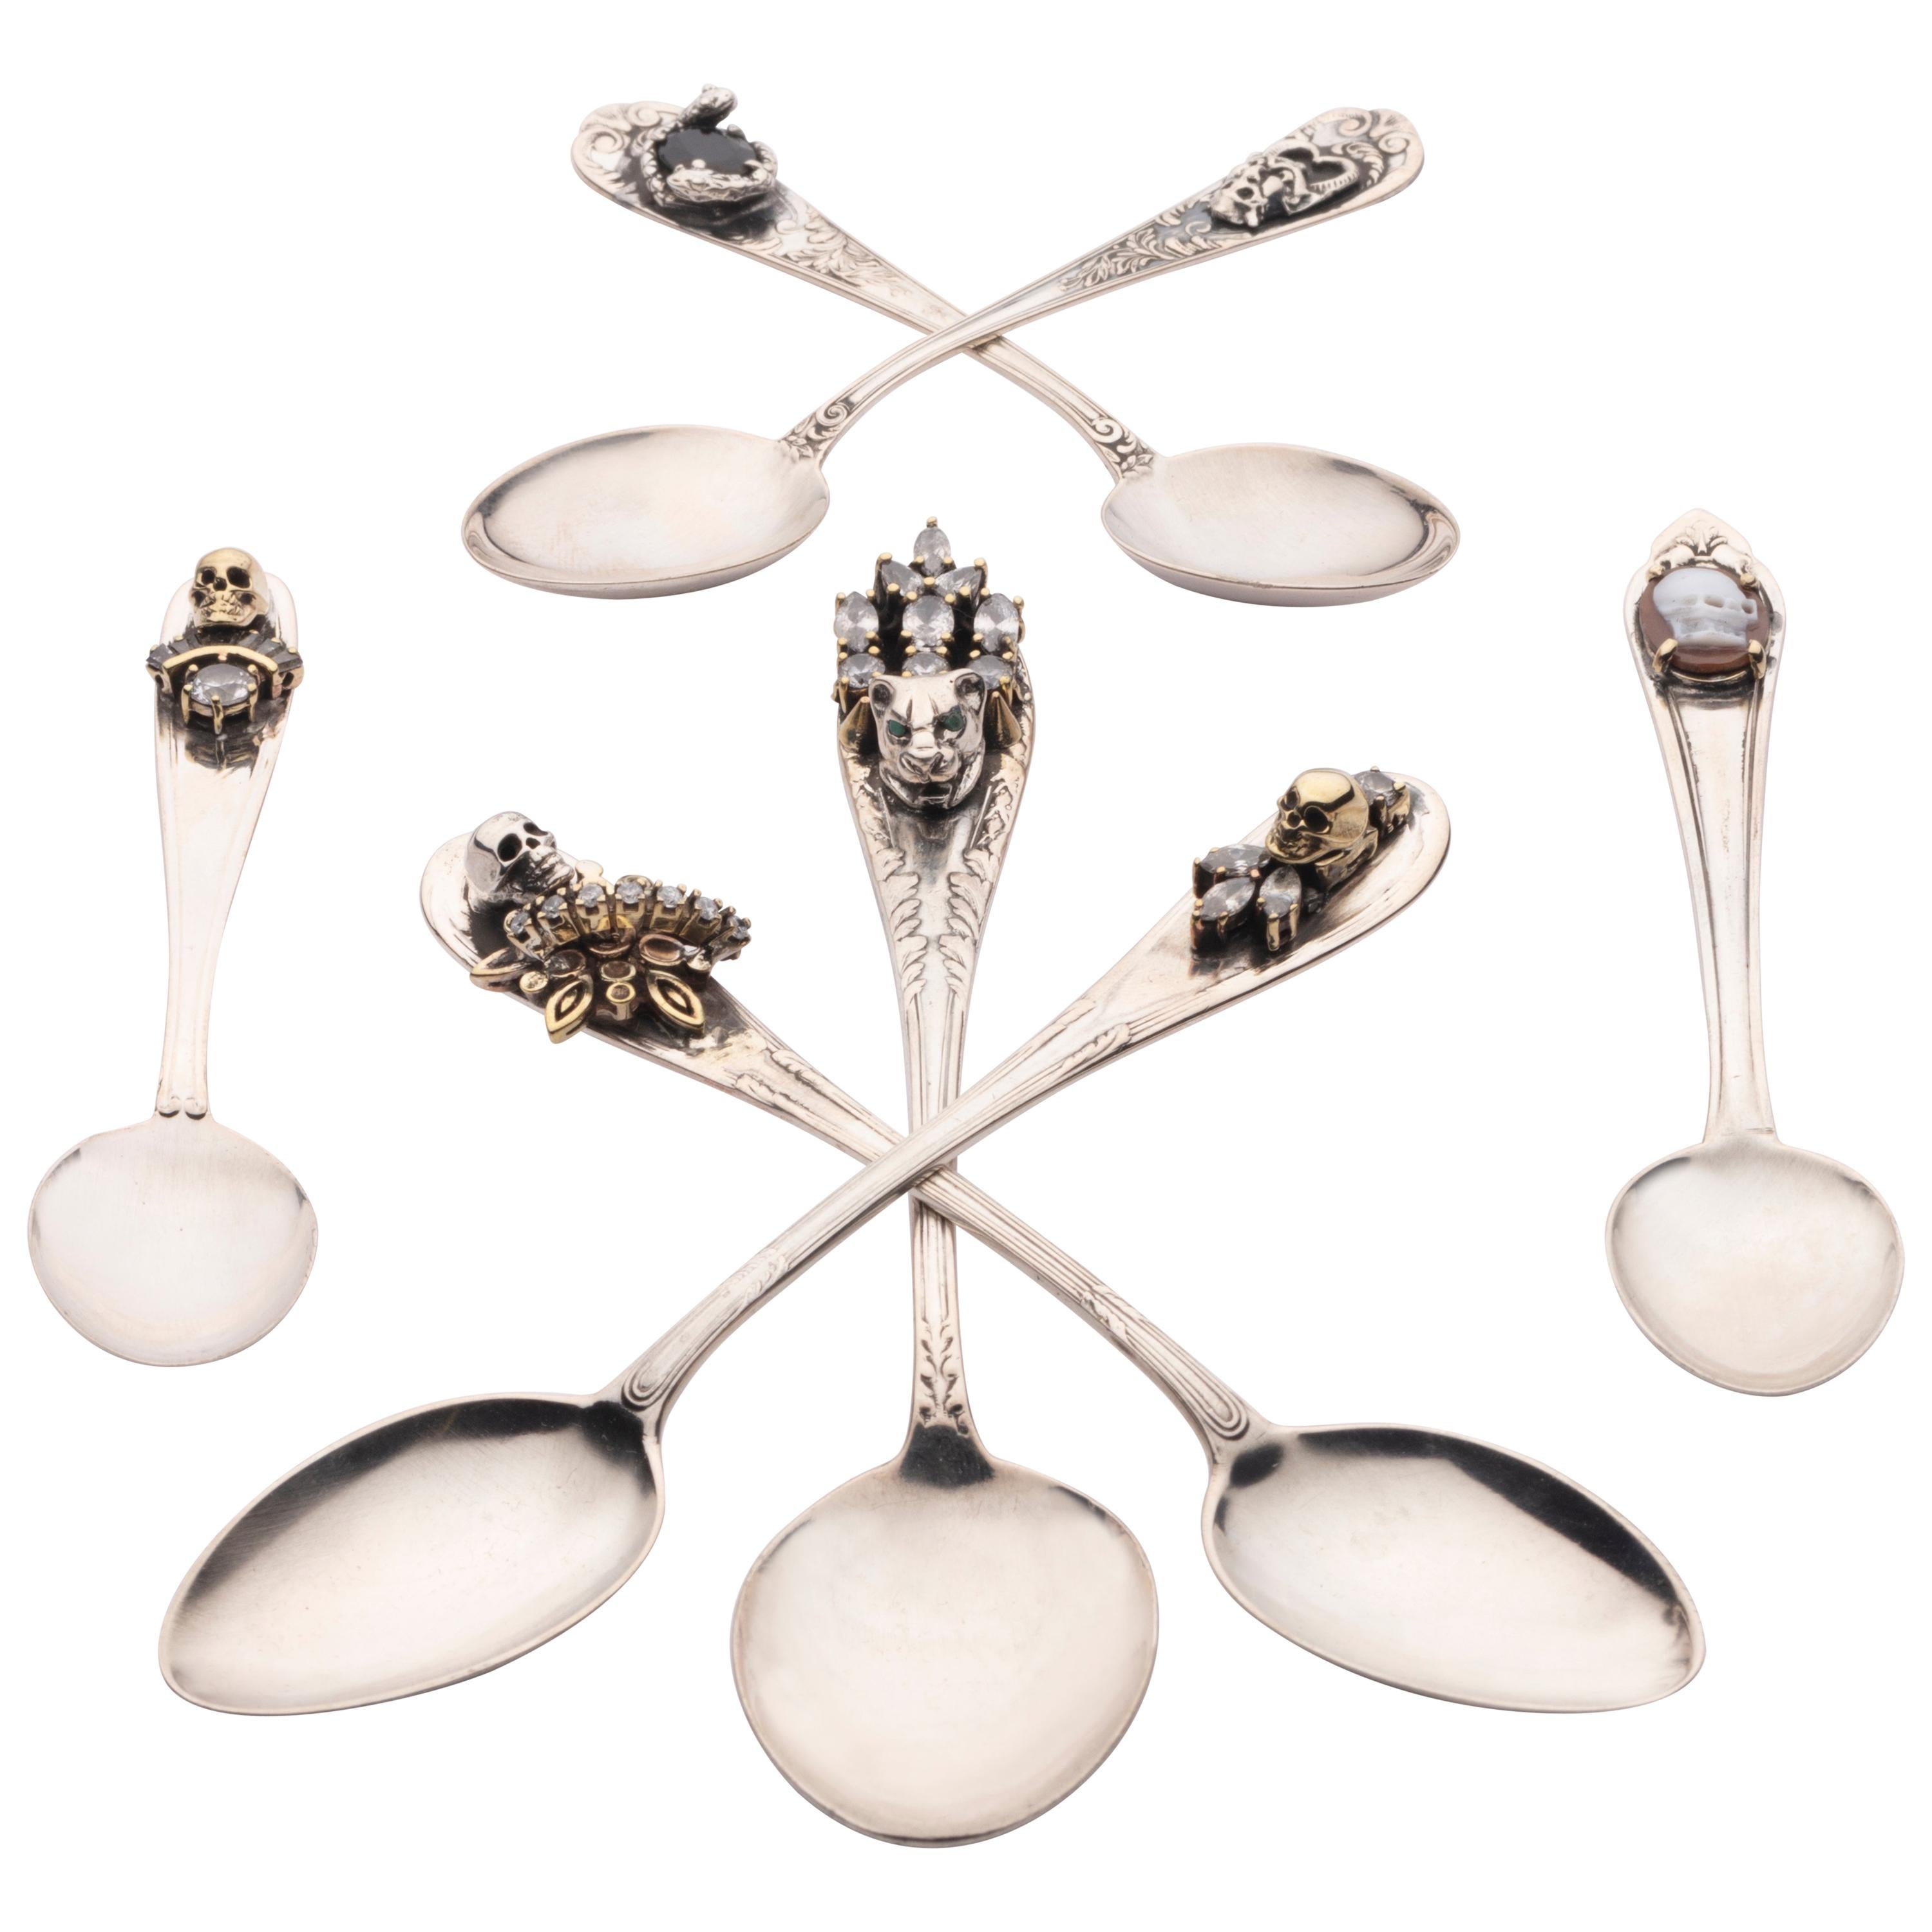 Fashion Silver Spoon Set from Iosselliani For Sale